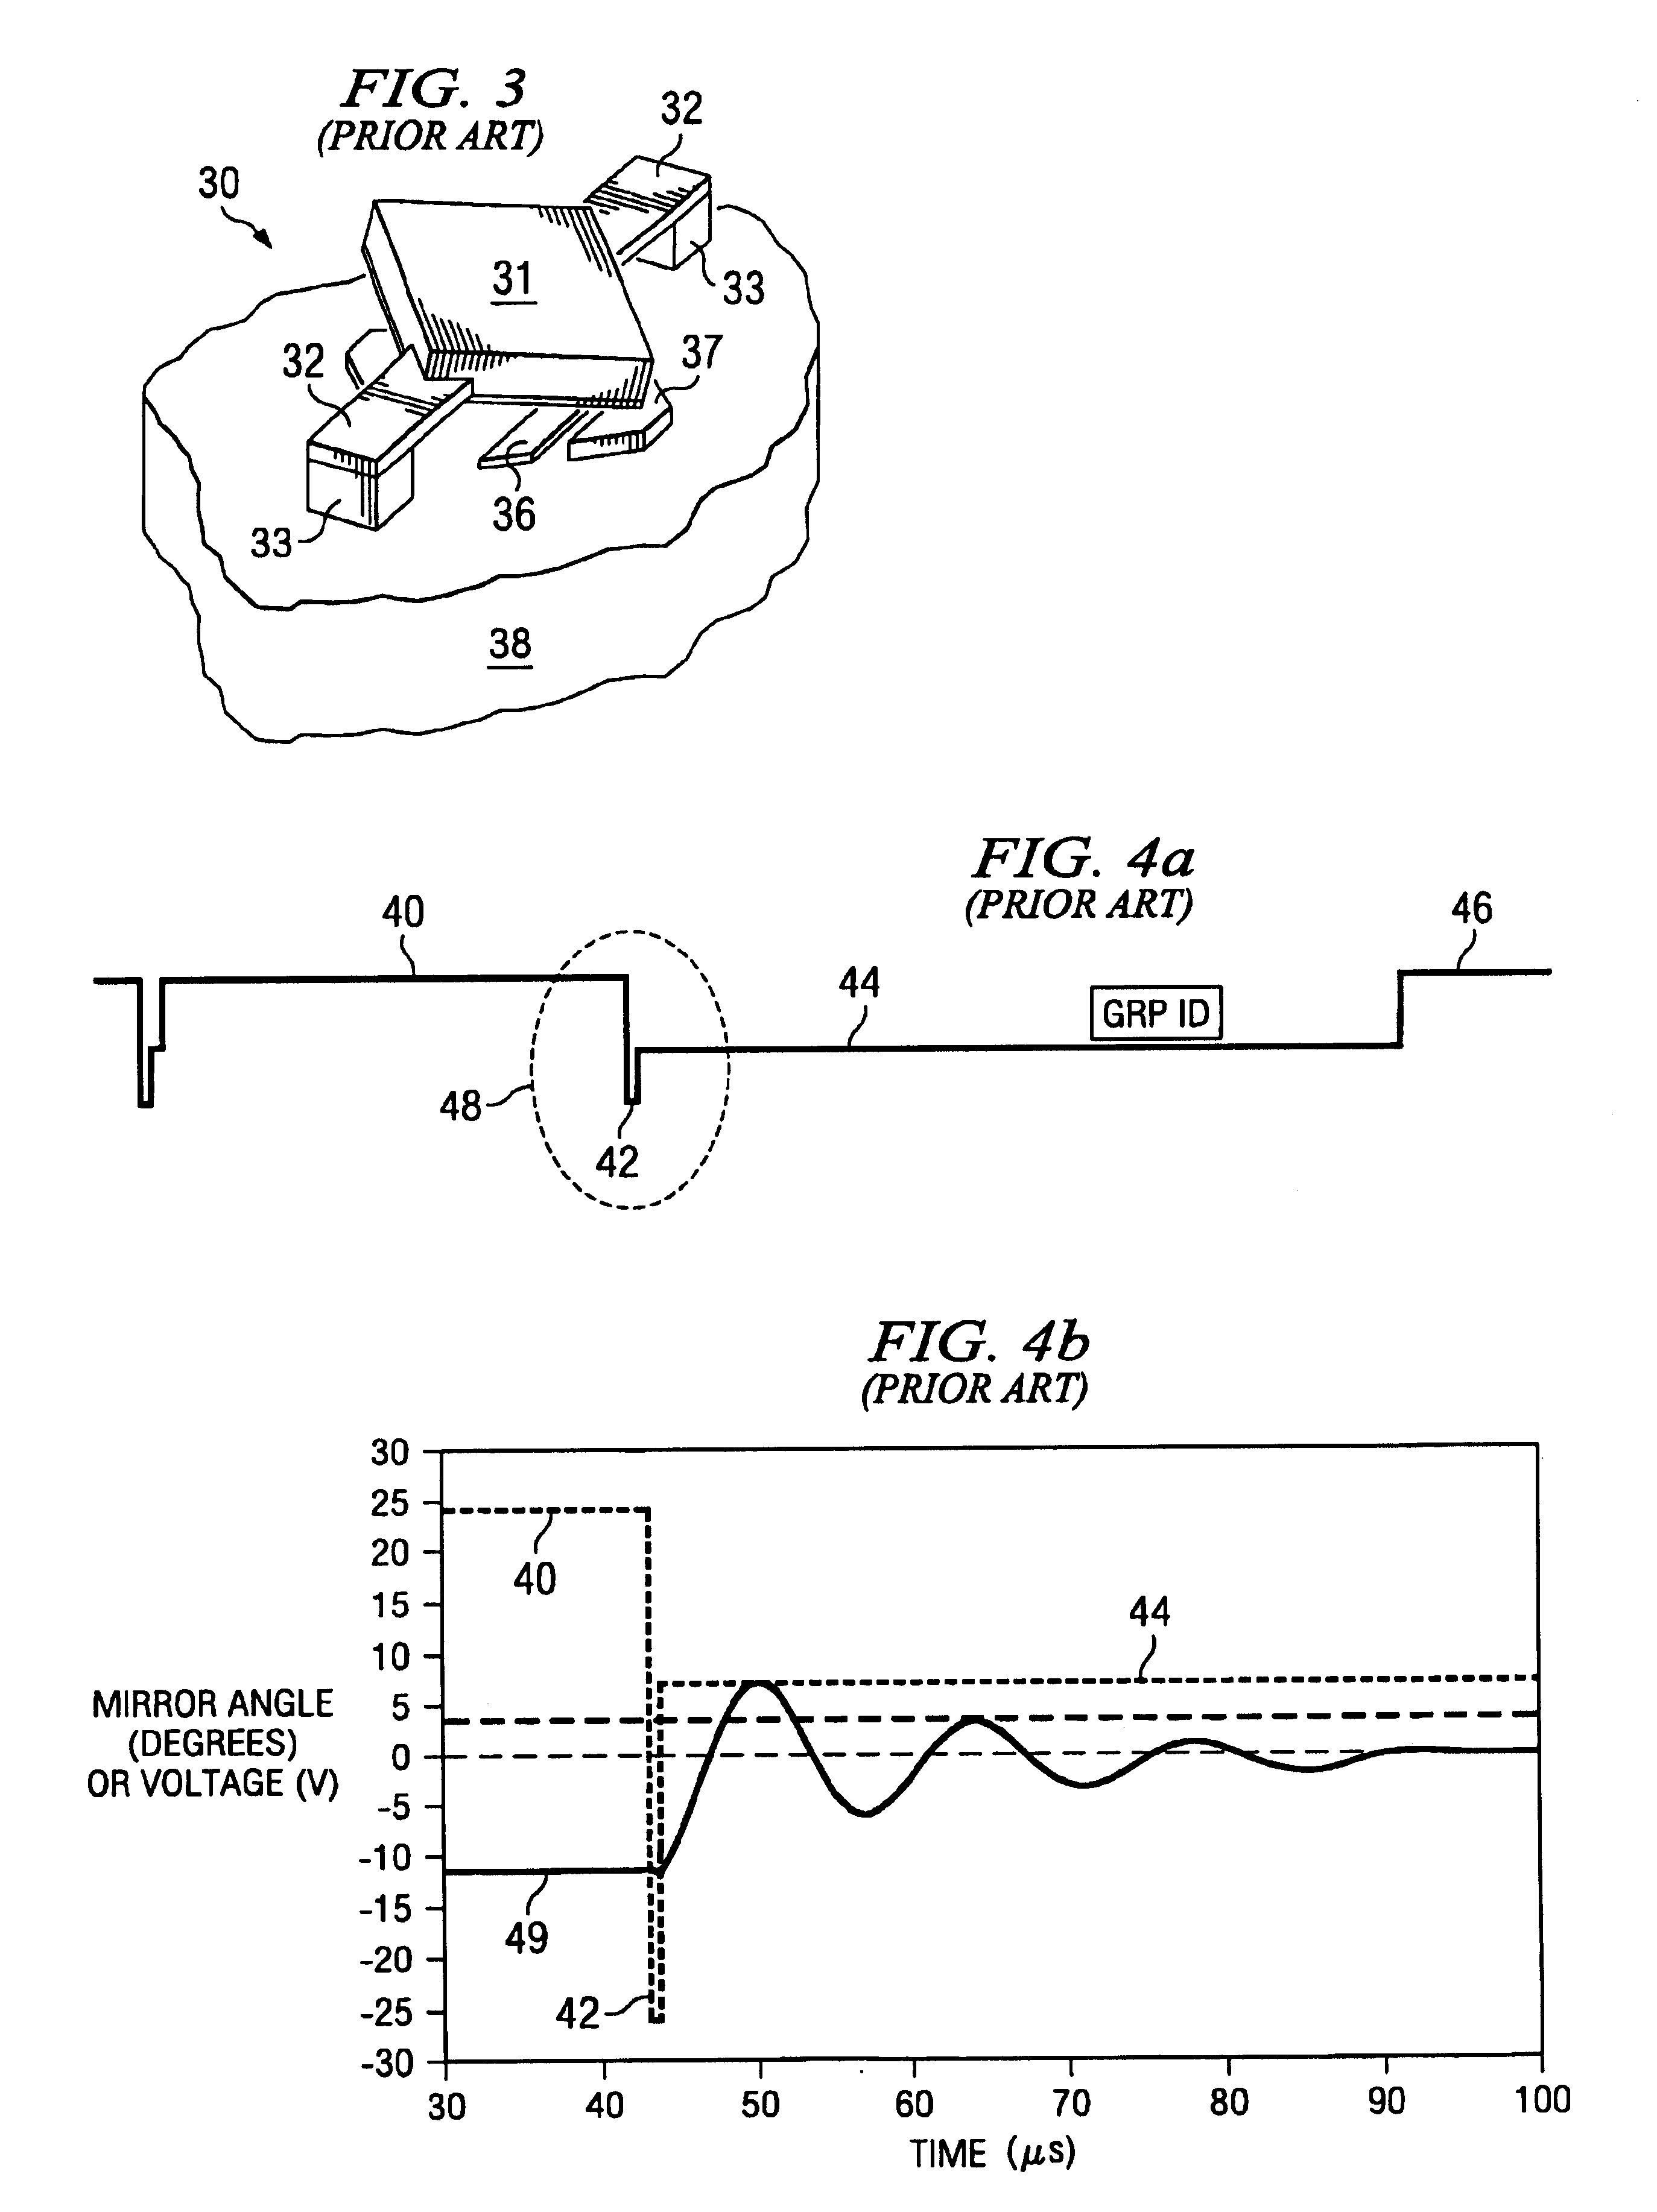 Damped control of a micromechanical device